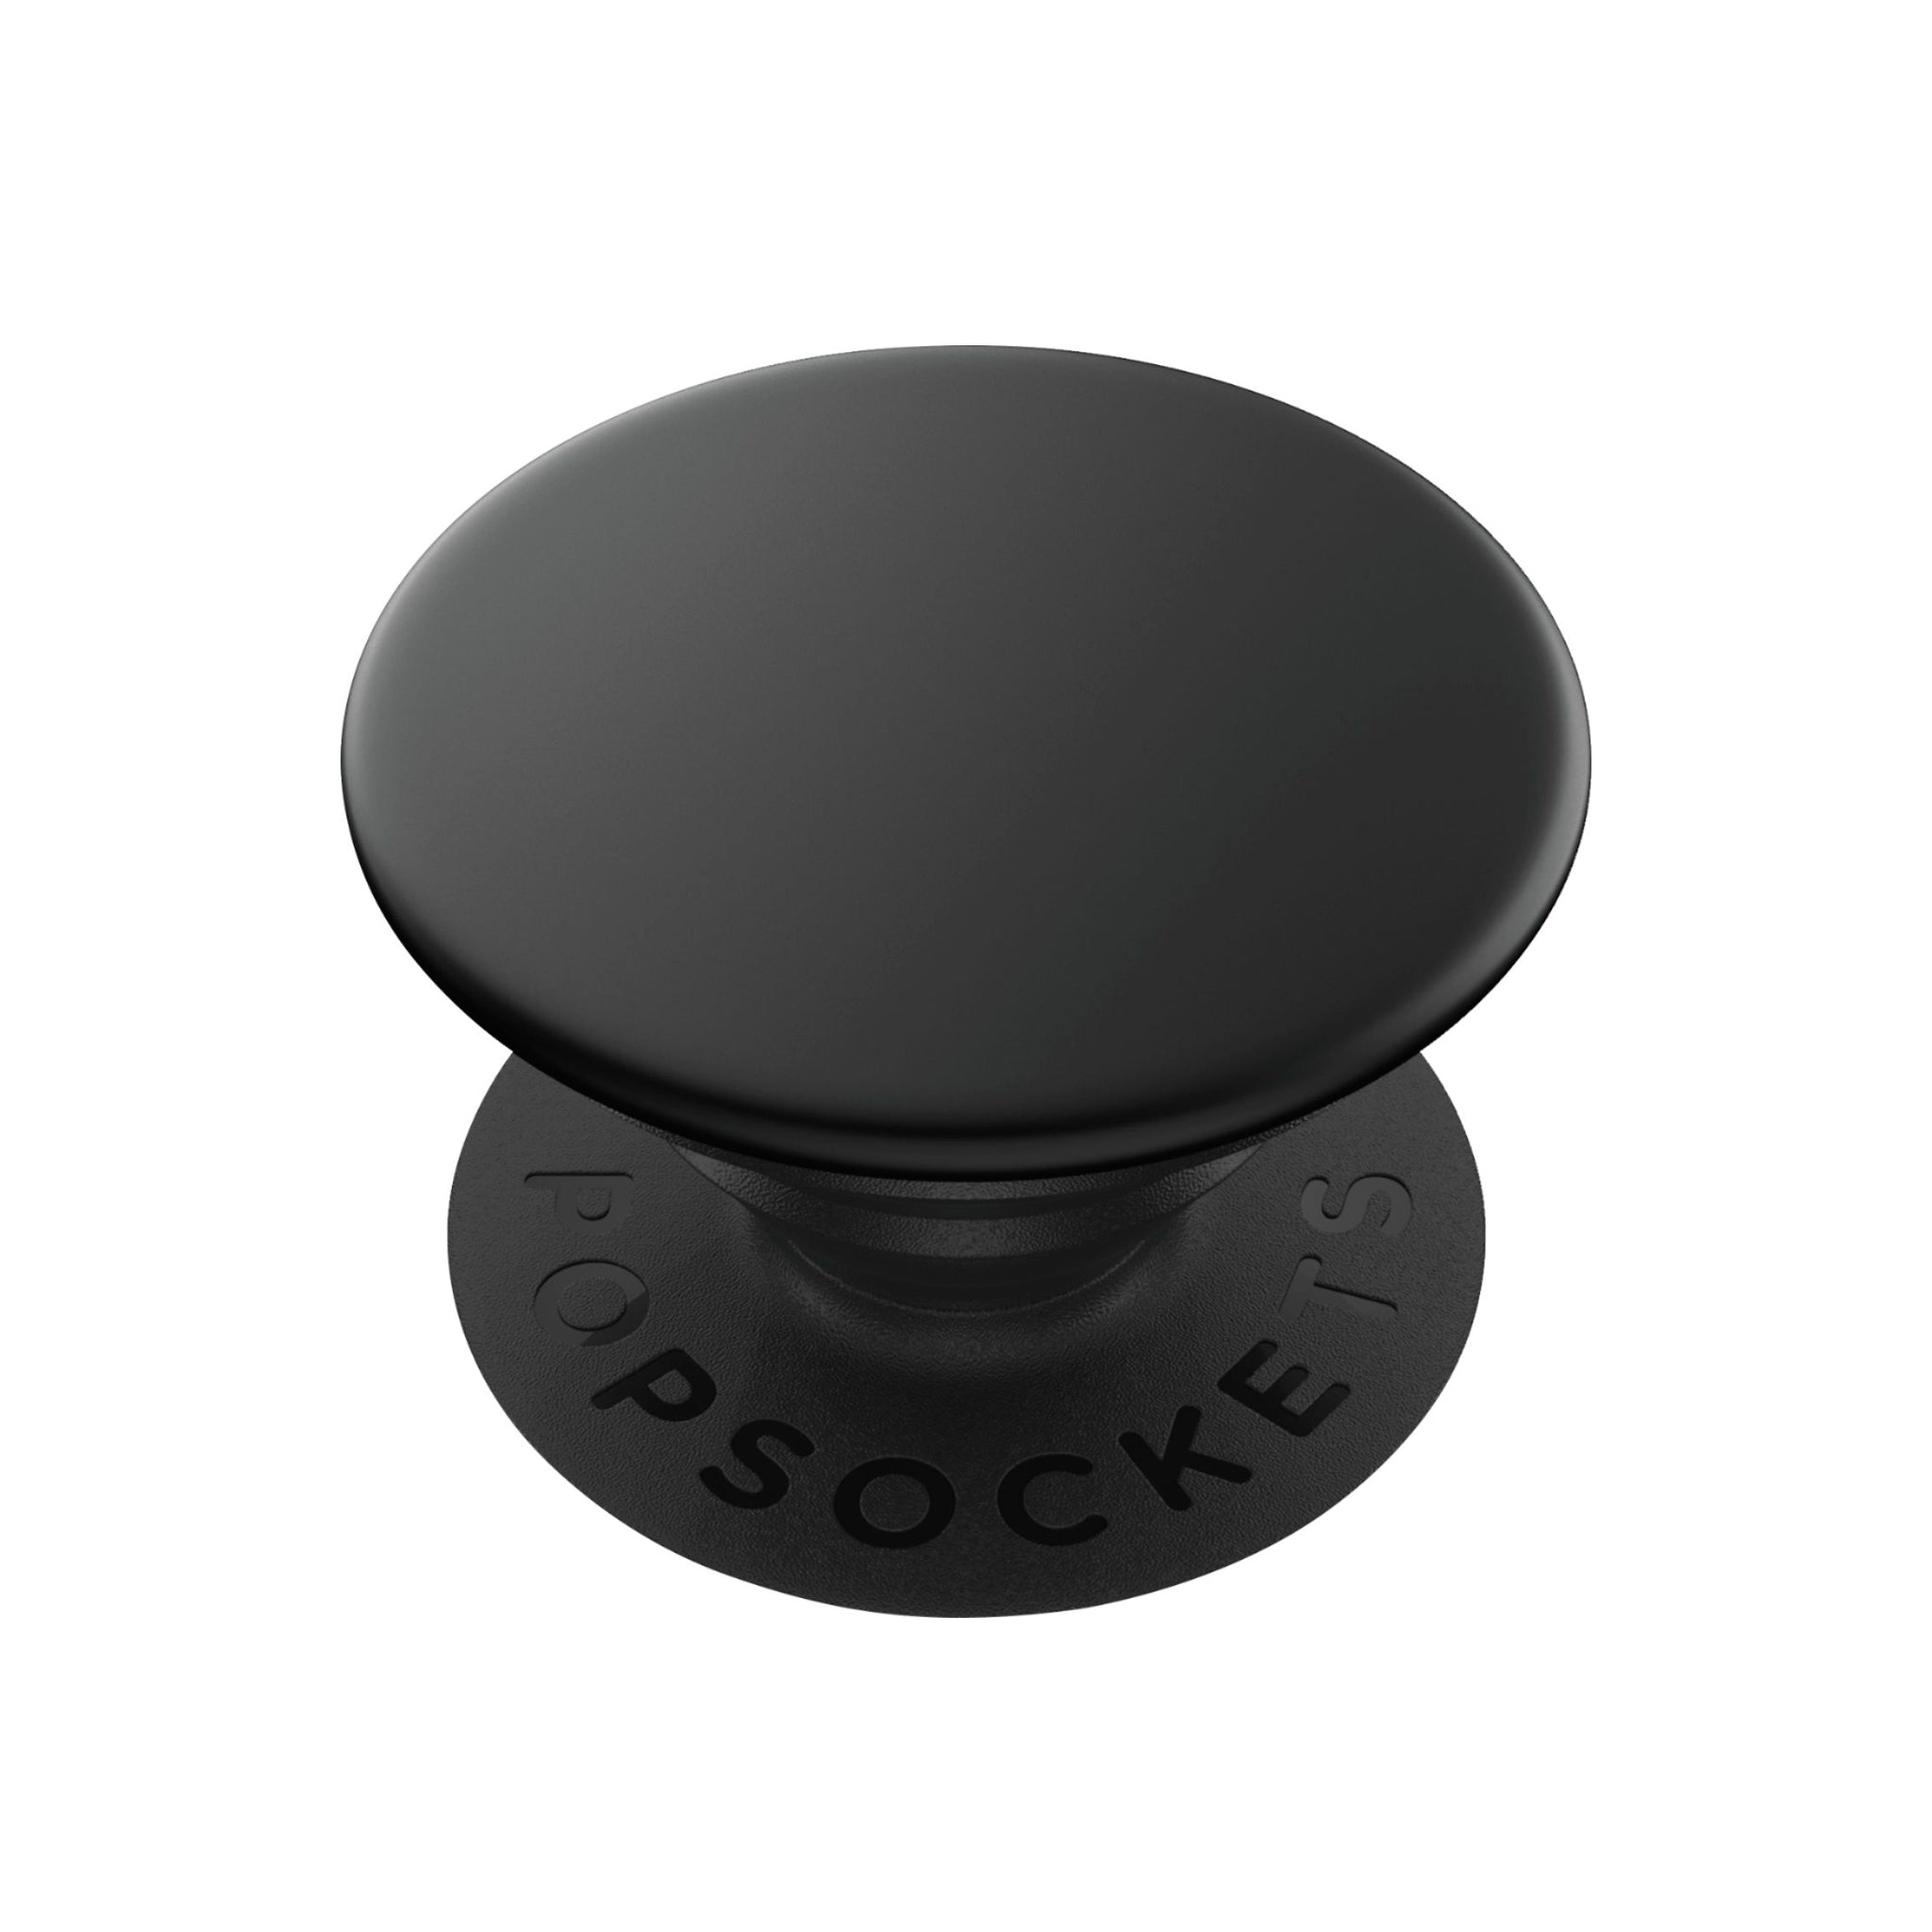 Popsockets - Popgrip Premium Aluminum Swappable Device Stand And Grip - Black